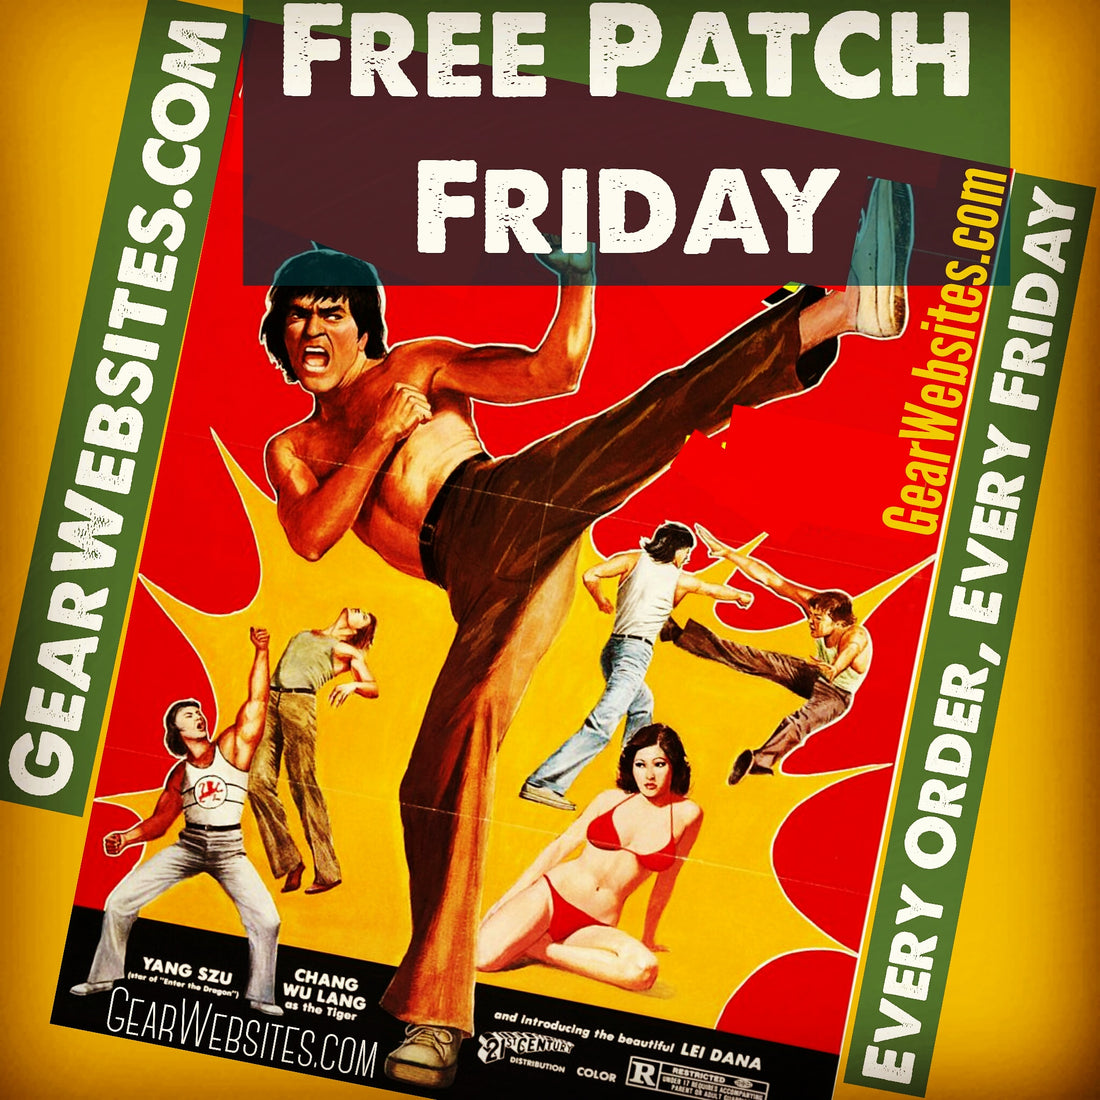 Kick Into FREE Patch Friday